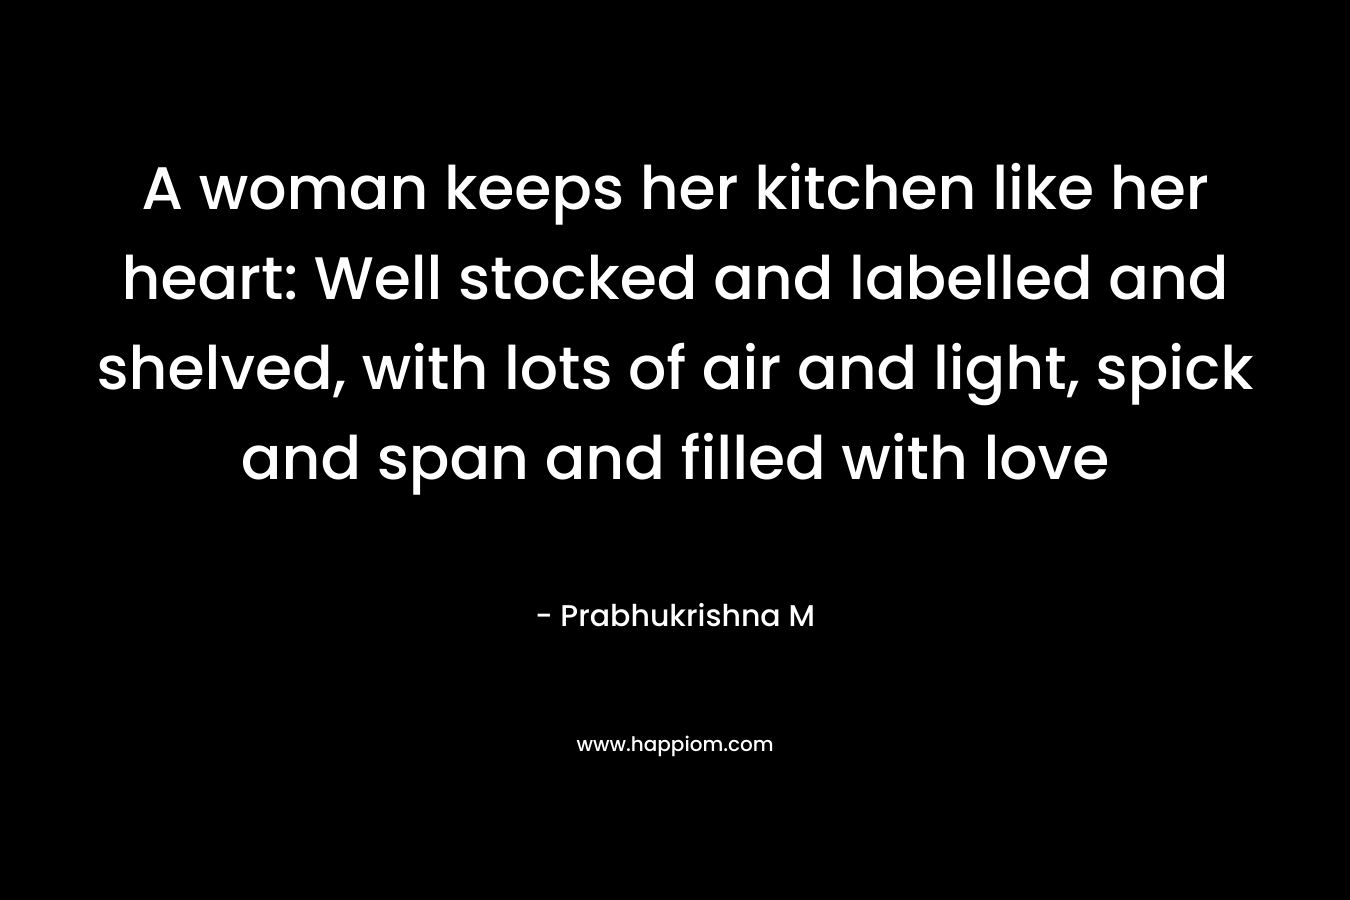 A woman keeps her kitchen like her heart: Well stocked and labelled and shelved, with lots of air and light, spick and span and filled with love – Prabhukrishna M